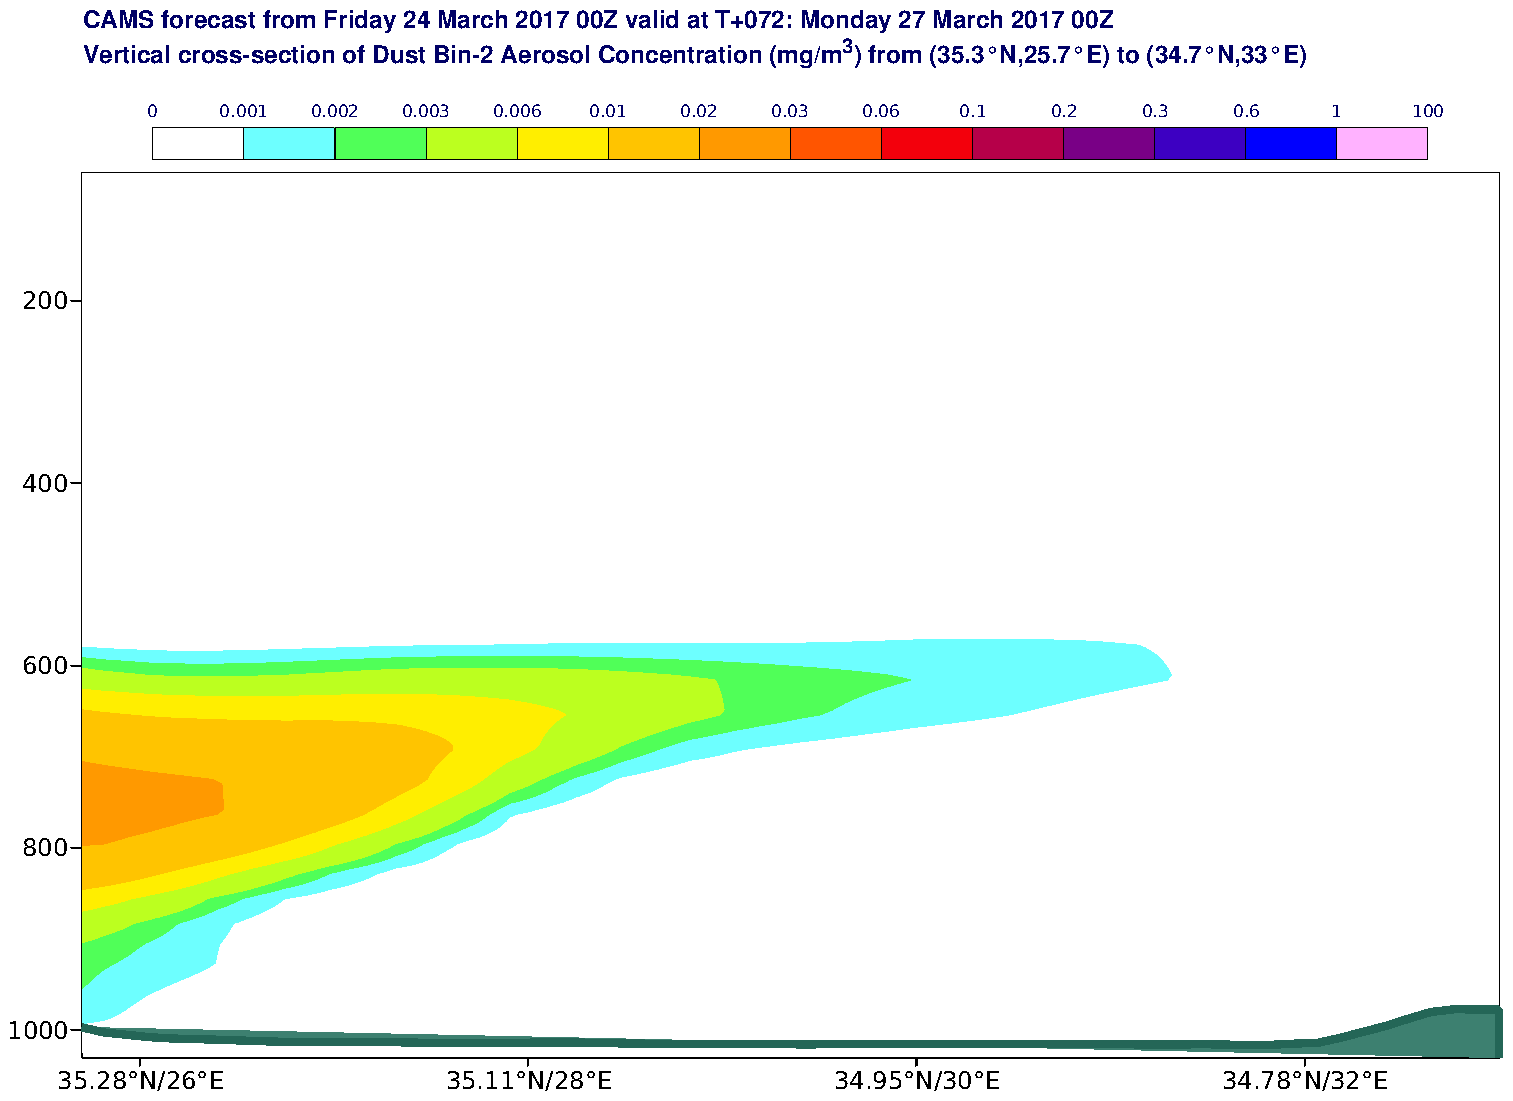 Vertical cross-section of Dust Bin-2 Aerosol Concentration (mg/m3) valid at T72 - 2017-03-27 00:00